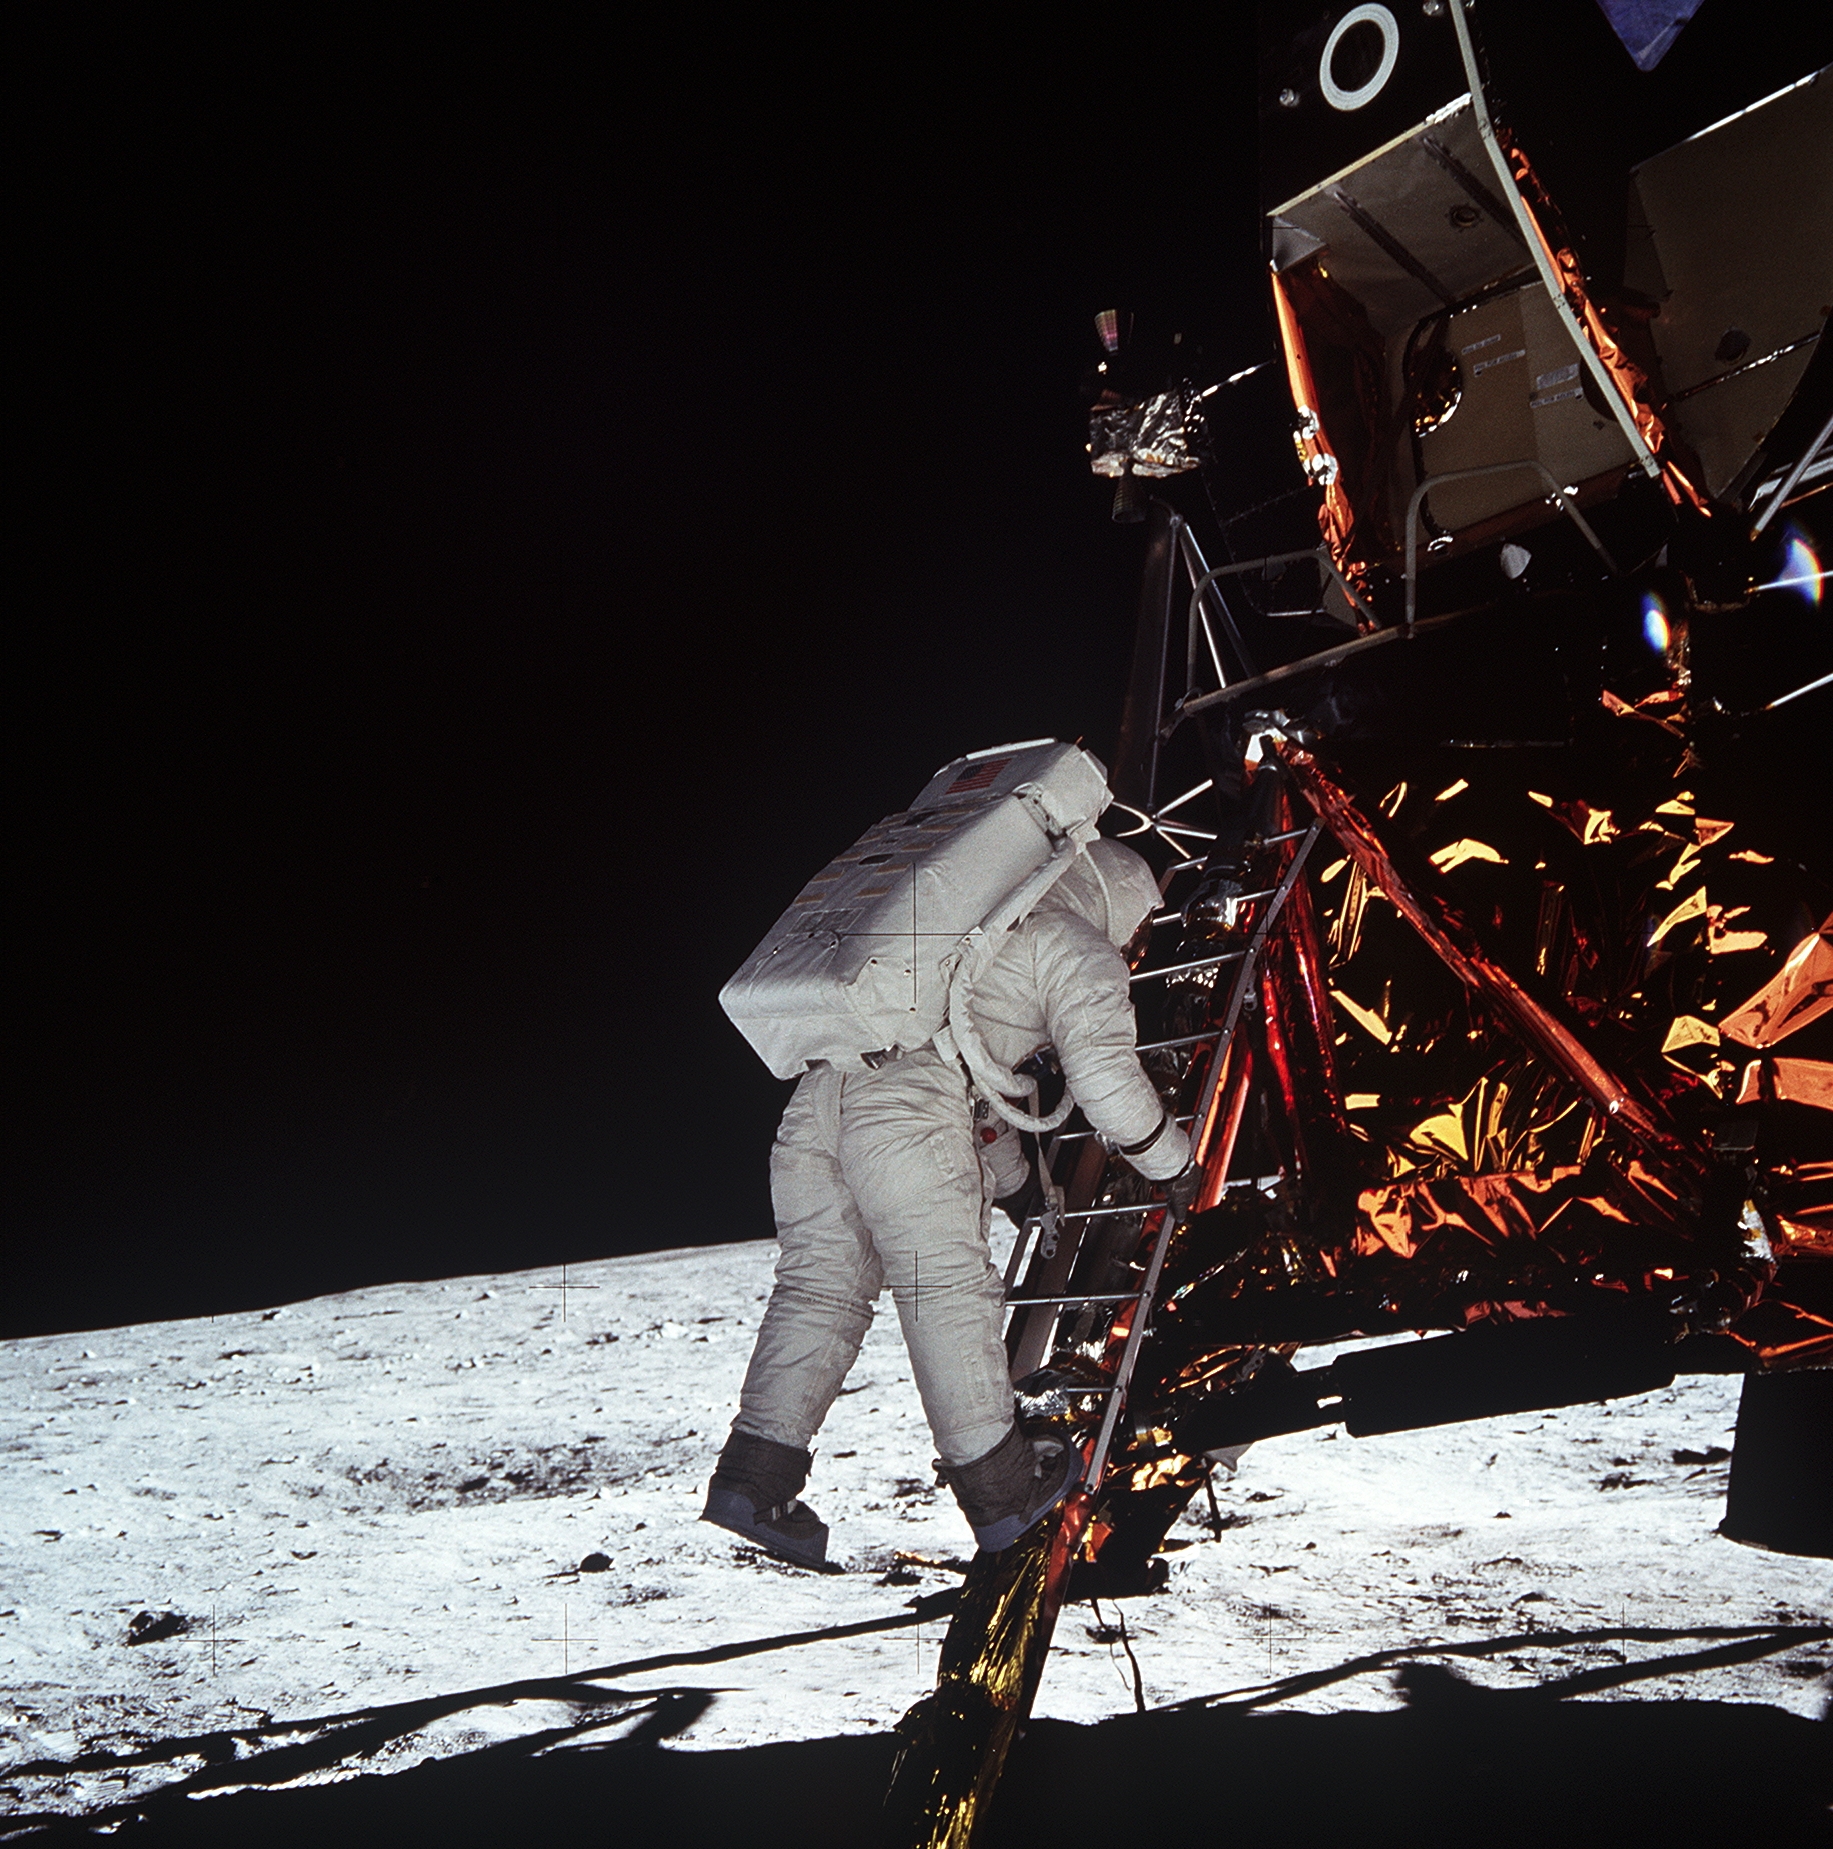 Armstrong photographed Buzz Aldrin descending the ladder to the Moon's surface. NASA.